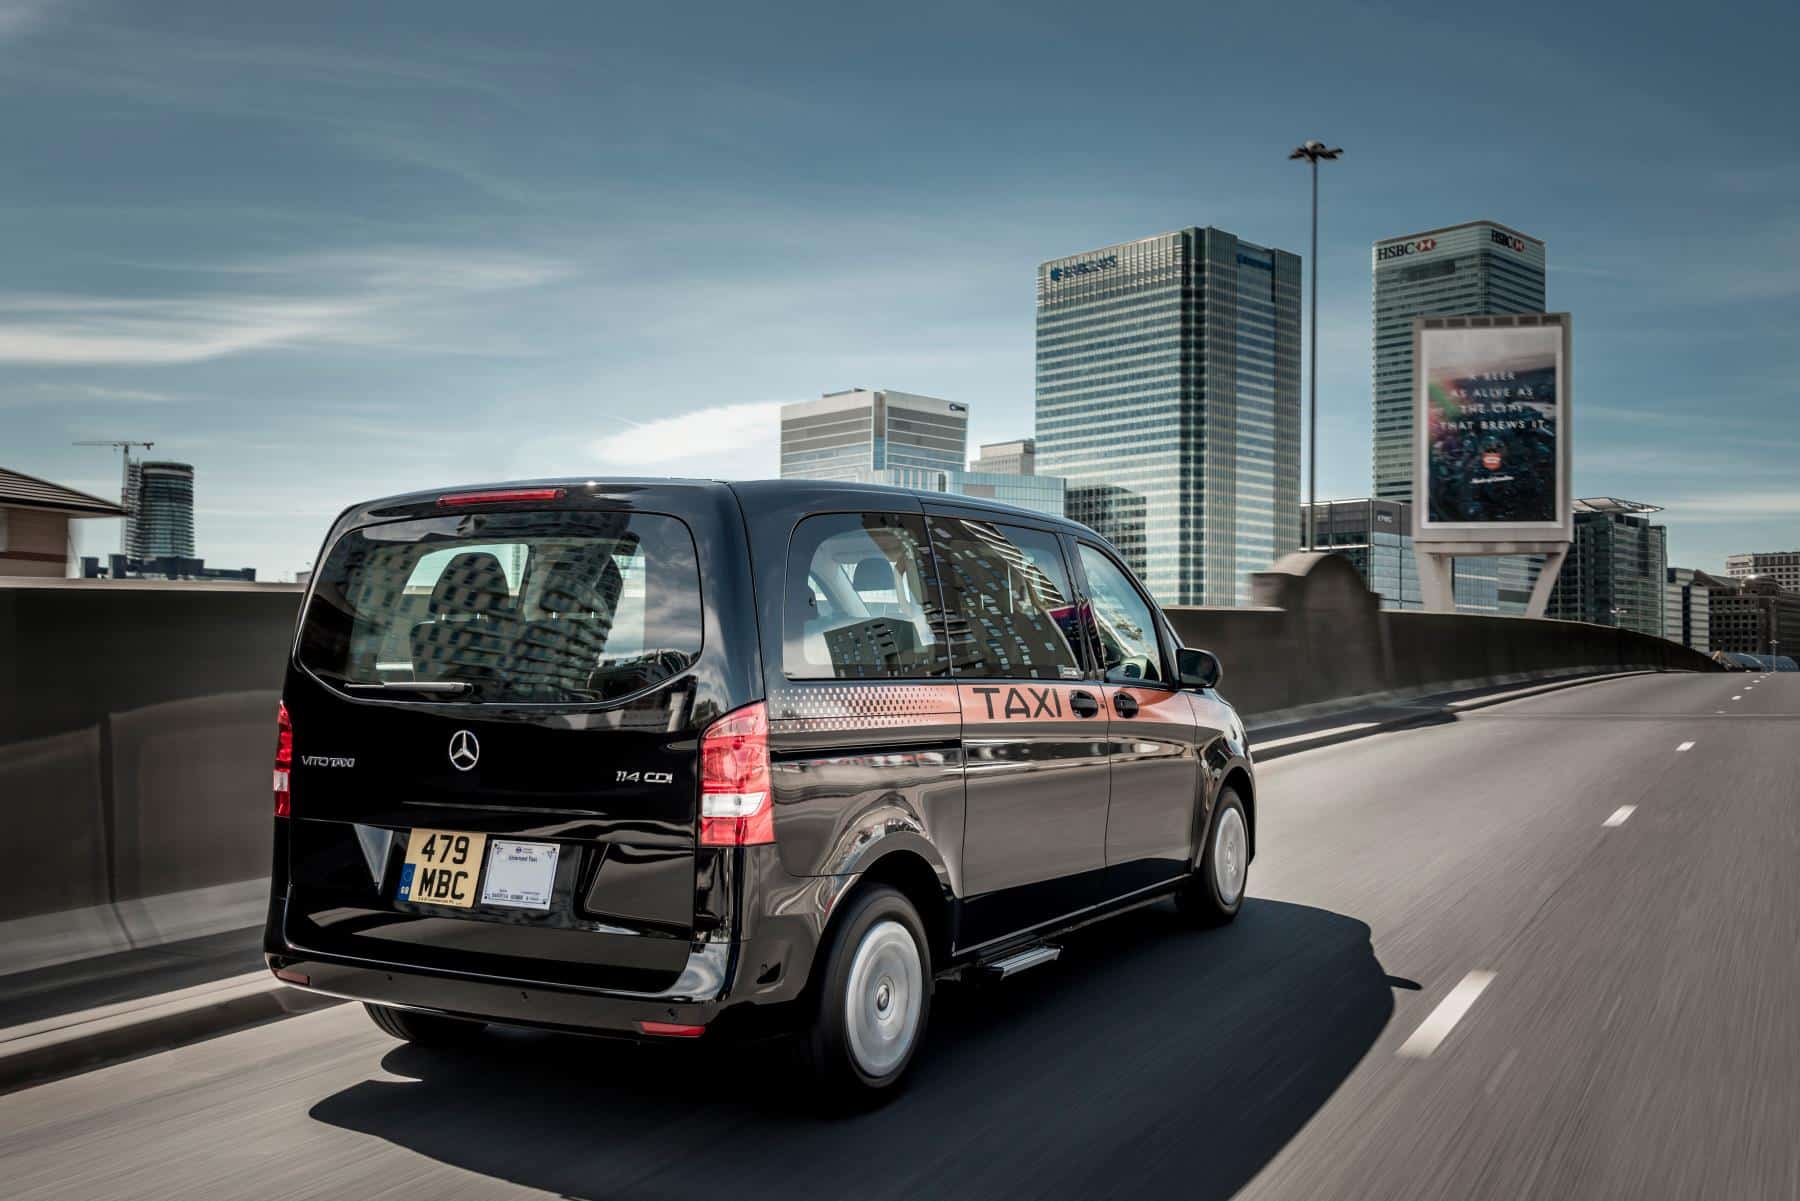 Low emissions - the new Euro 6 Mercedes Vito Taxi 